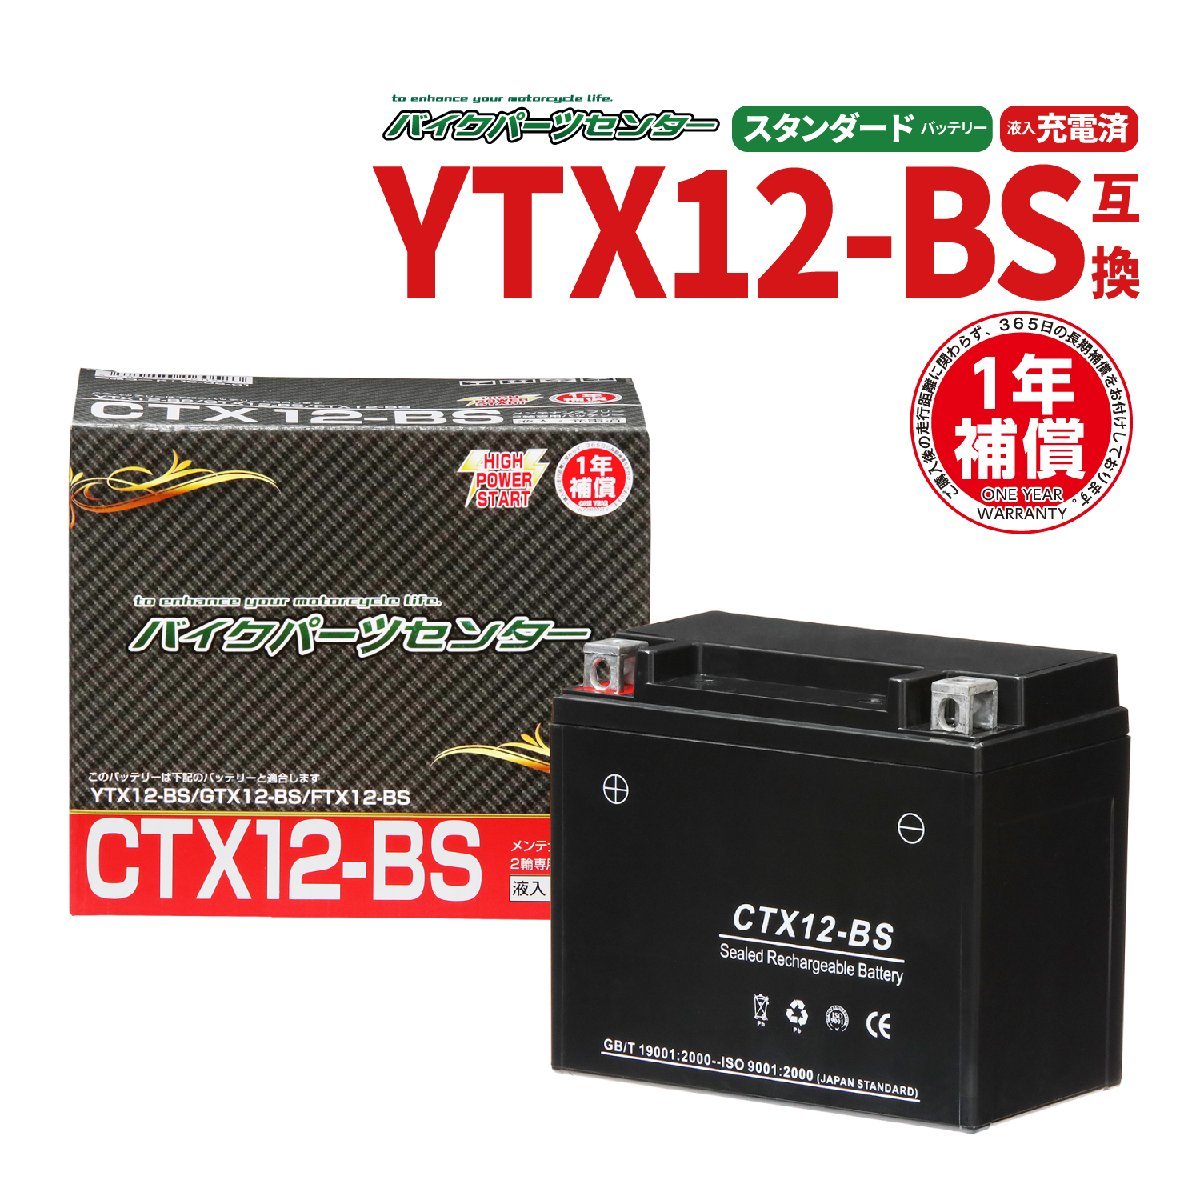 YTX12-BS互換 CTX12-BSバイクバッテリー　 1年間保証付き 新品 バイクパーツセンター_画像1